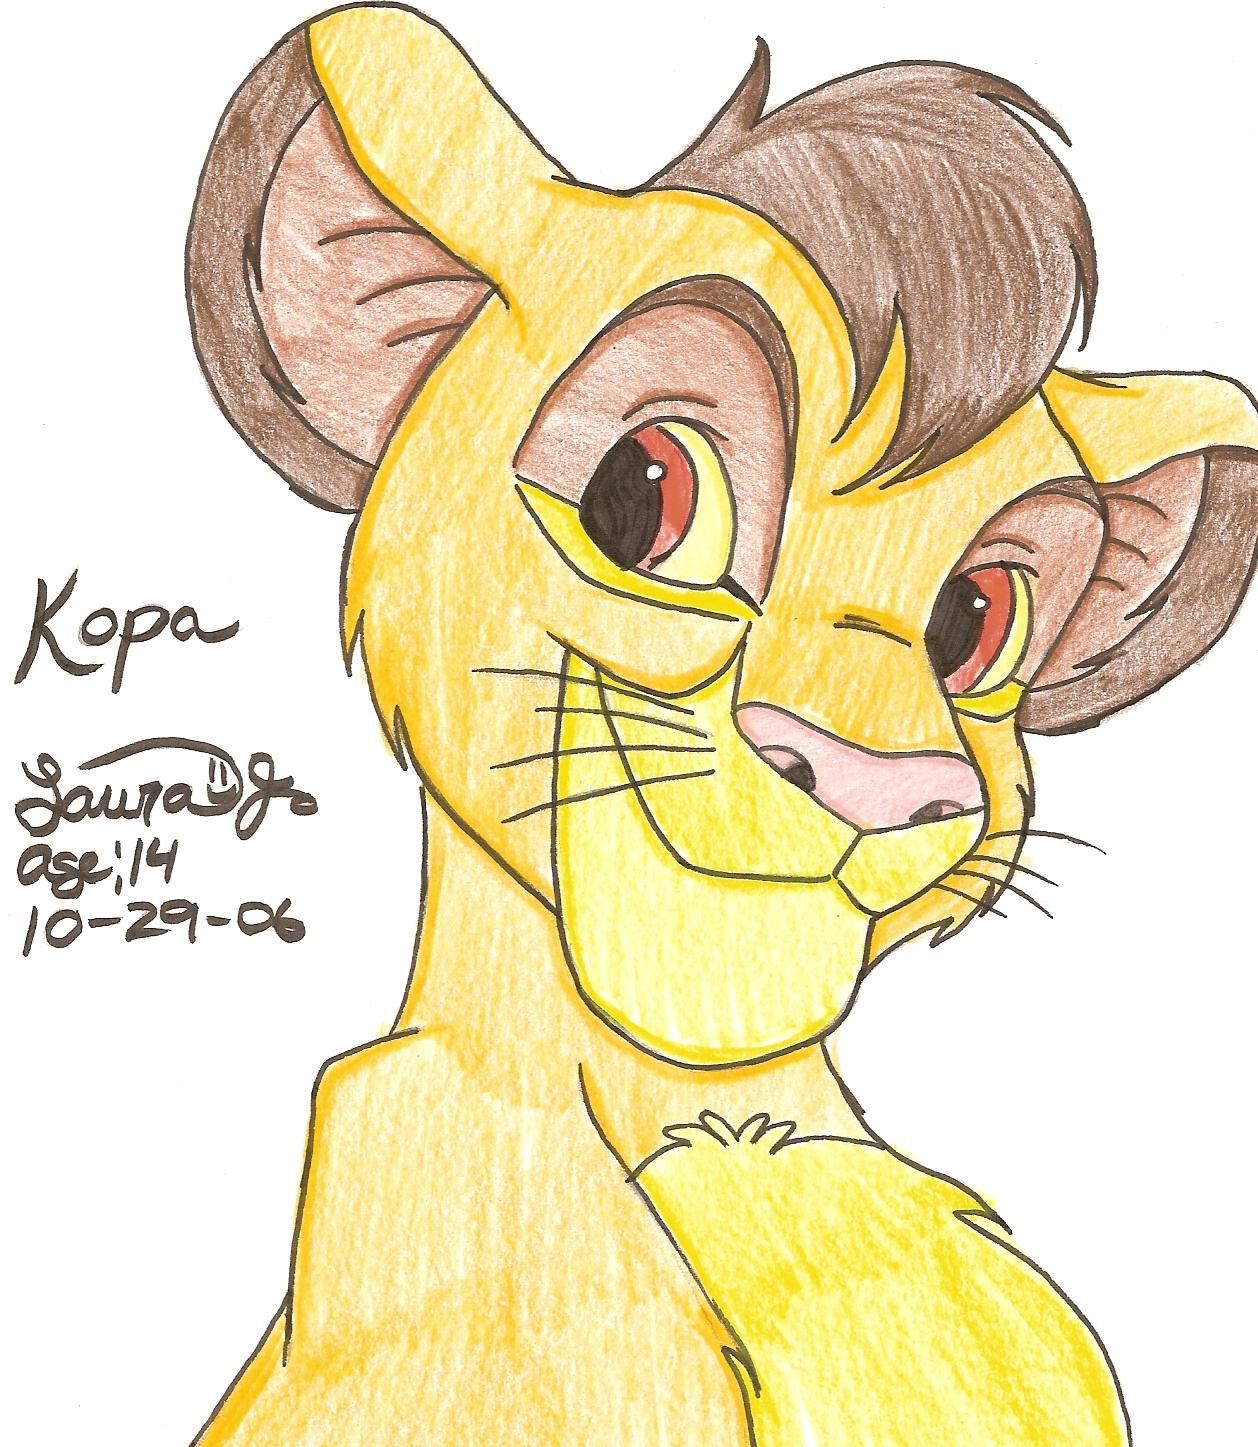 Another Kopa pic by kittysan5